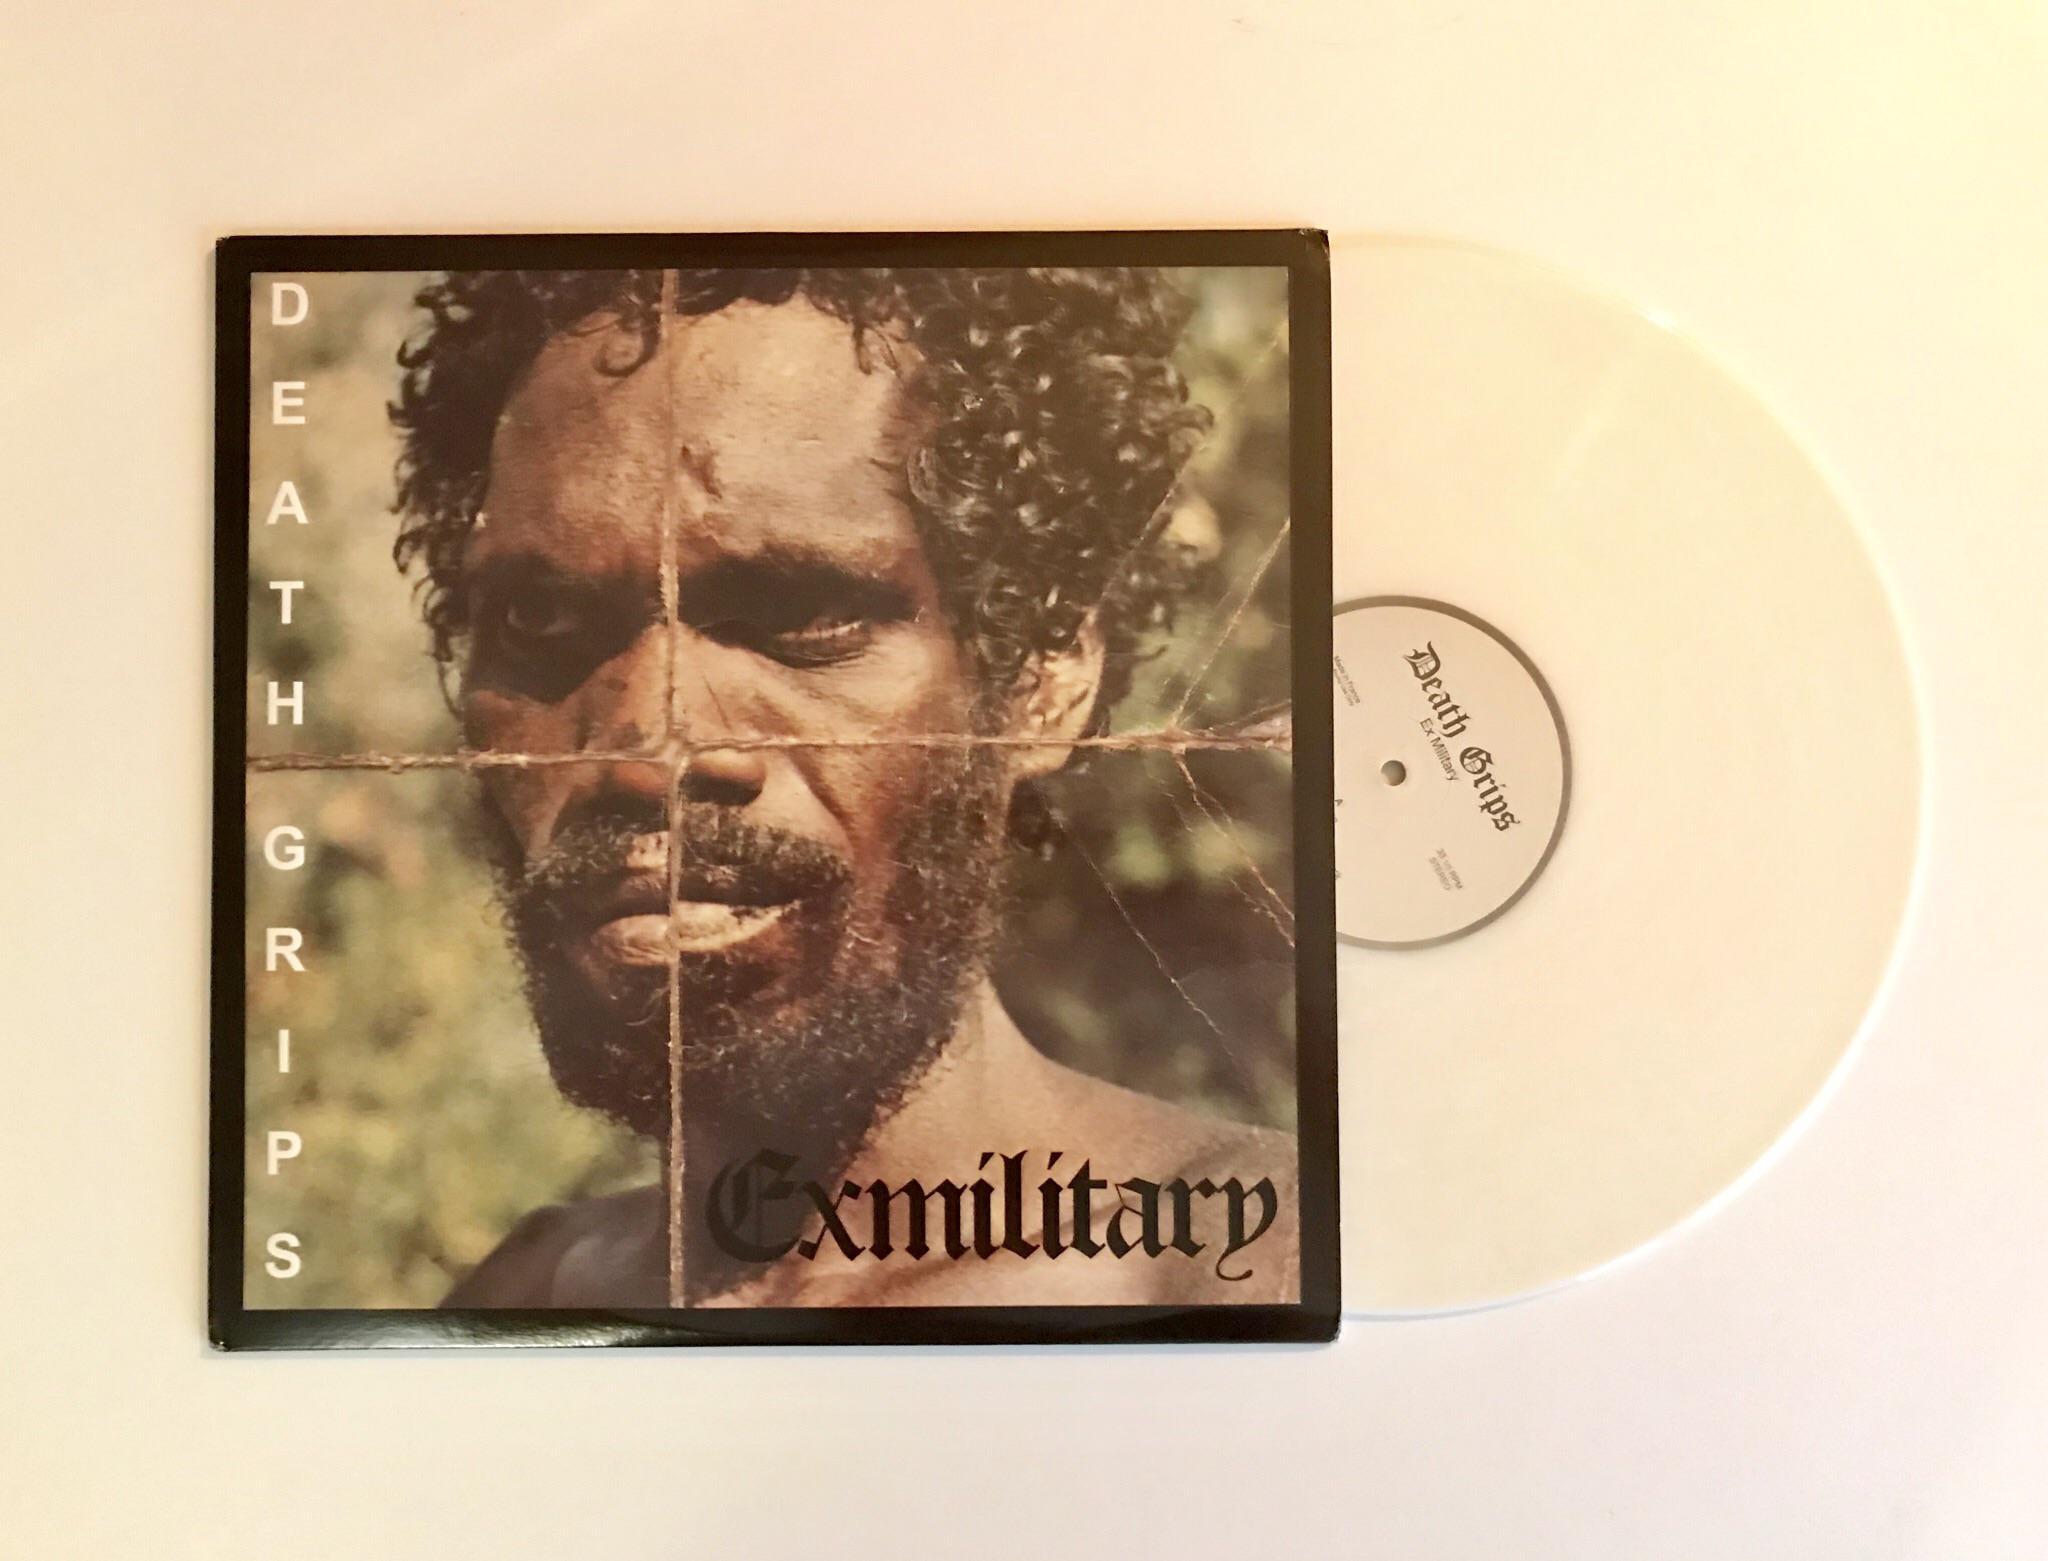 death grips most expensive vinyl record